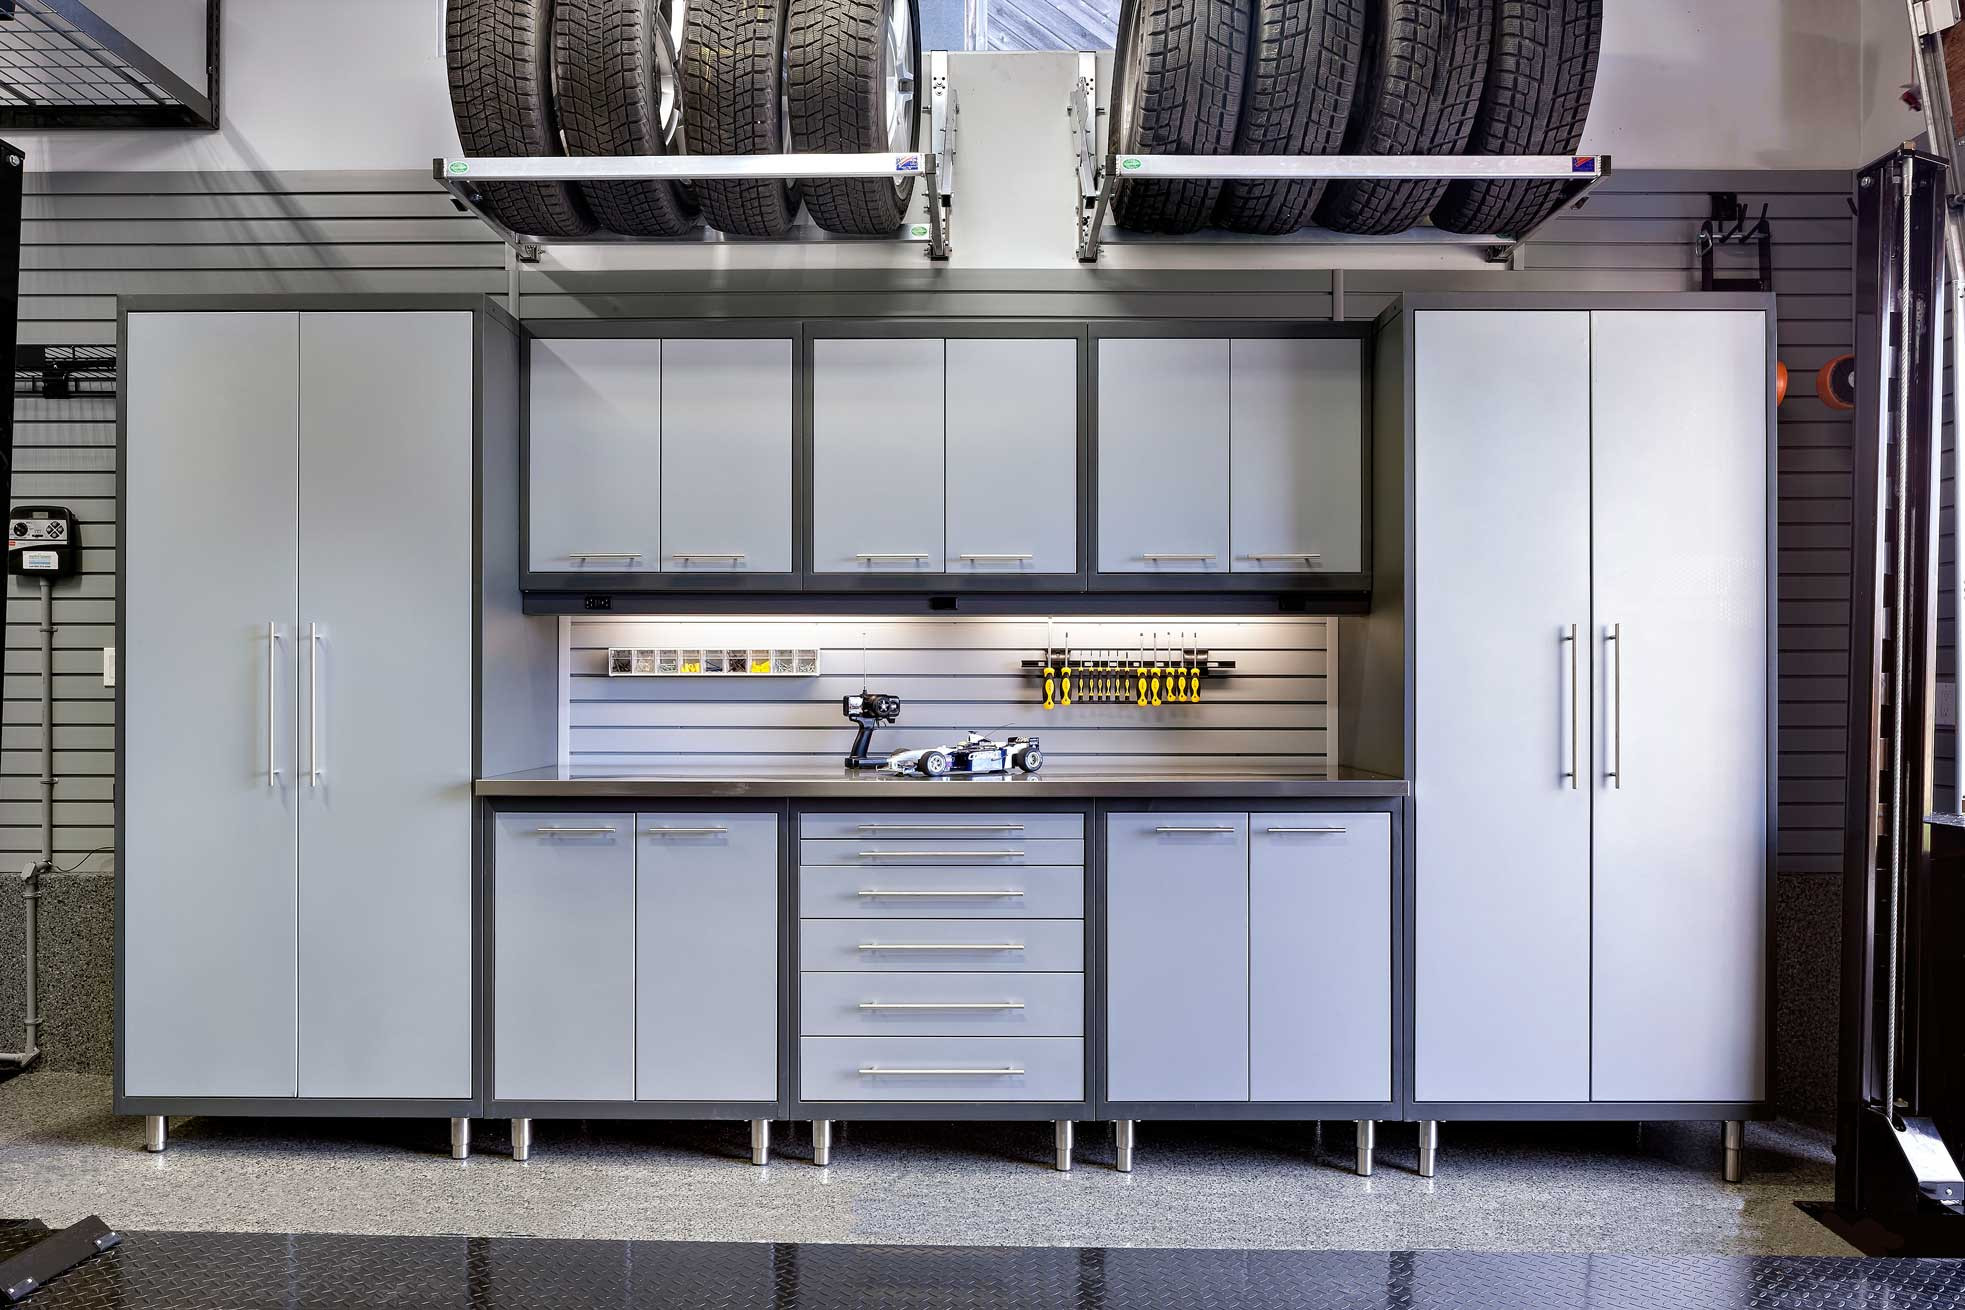 Garage Organizer Systems
 4 Storage Options That Will Maximize Your Garage Space